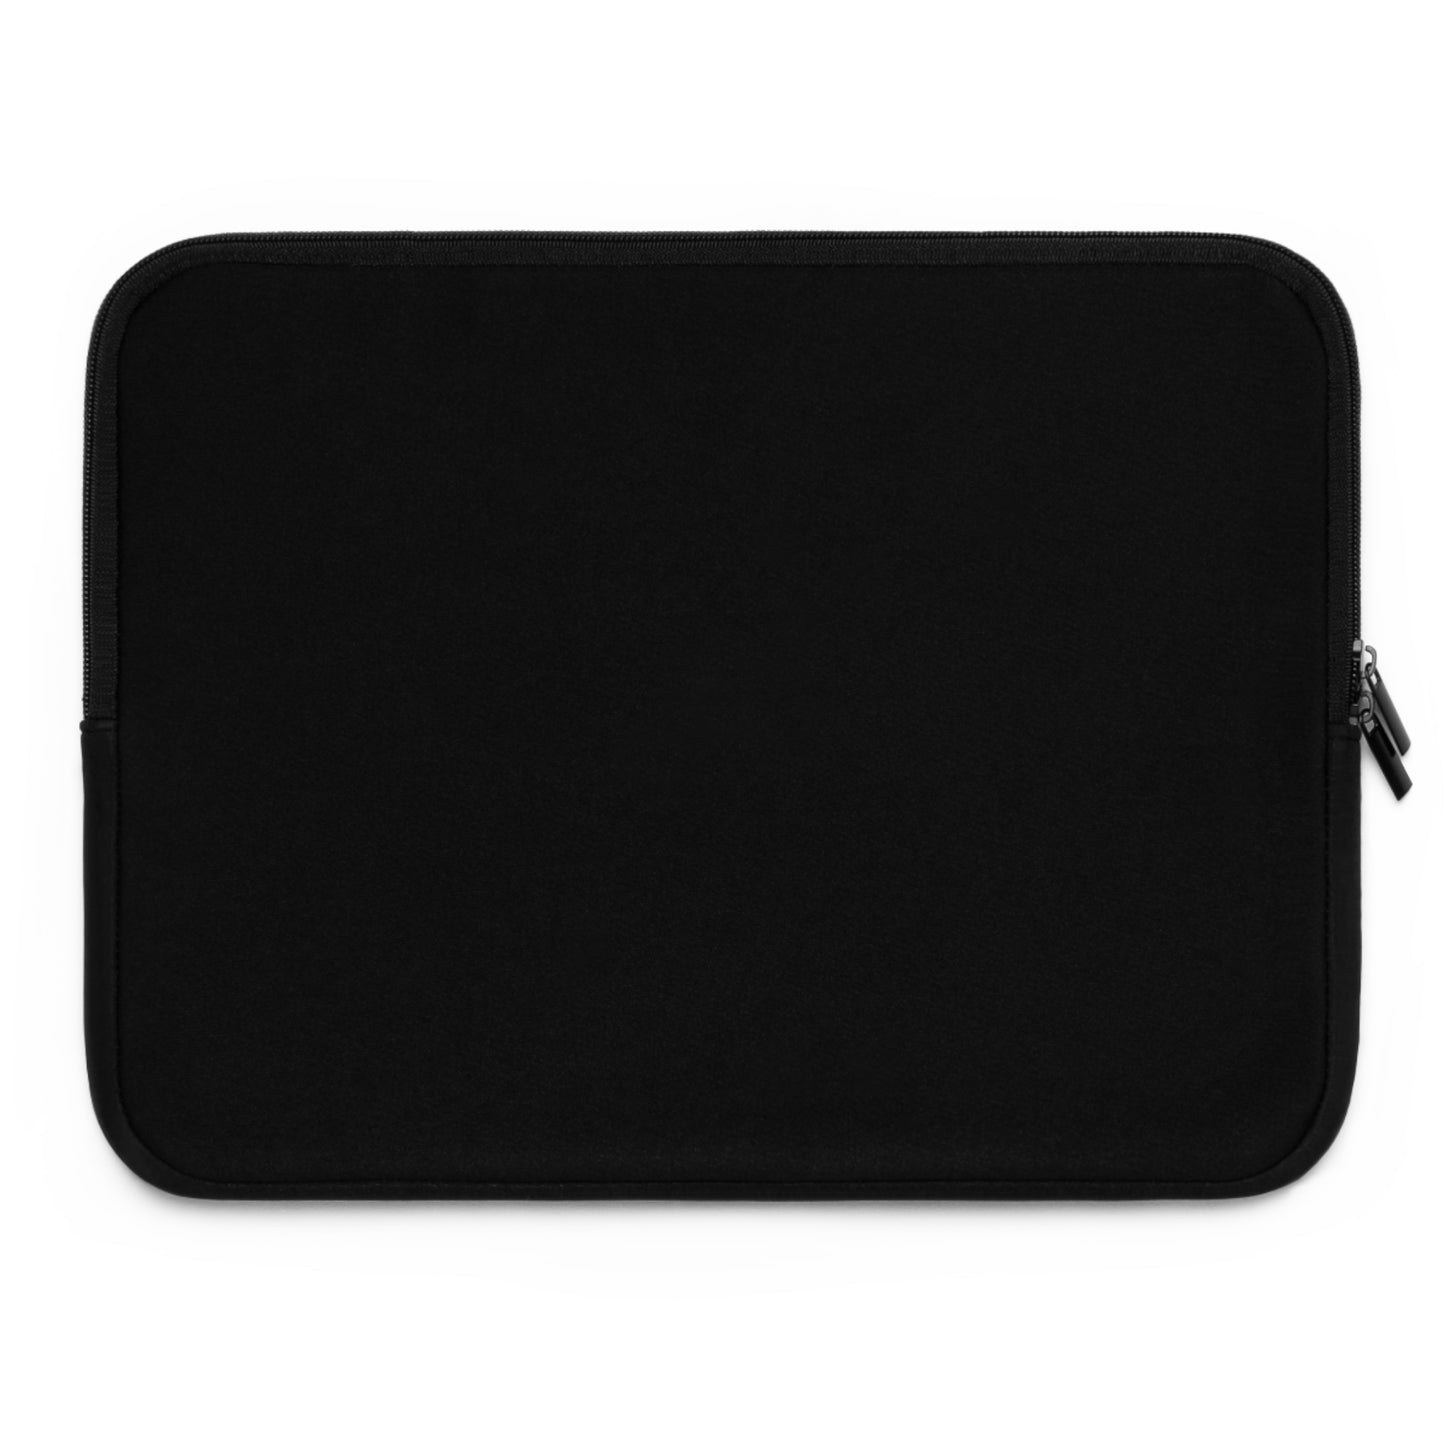 Day Dreamers Dream Day Labyrinth Laptop Sleeve